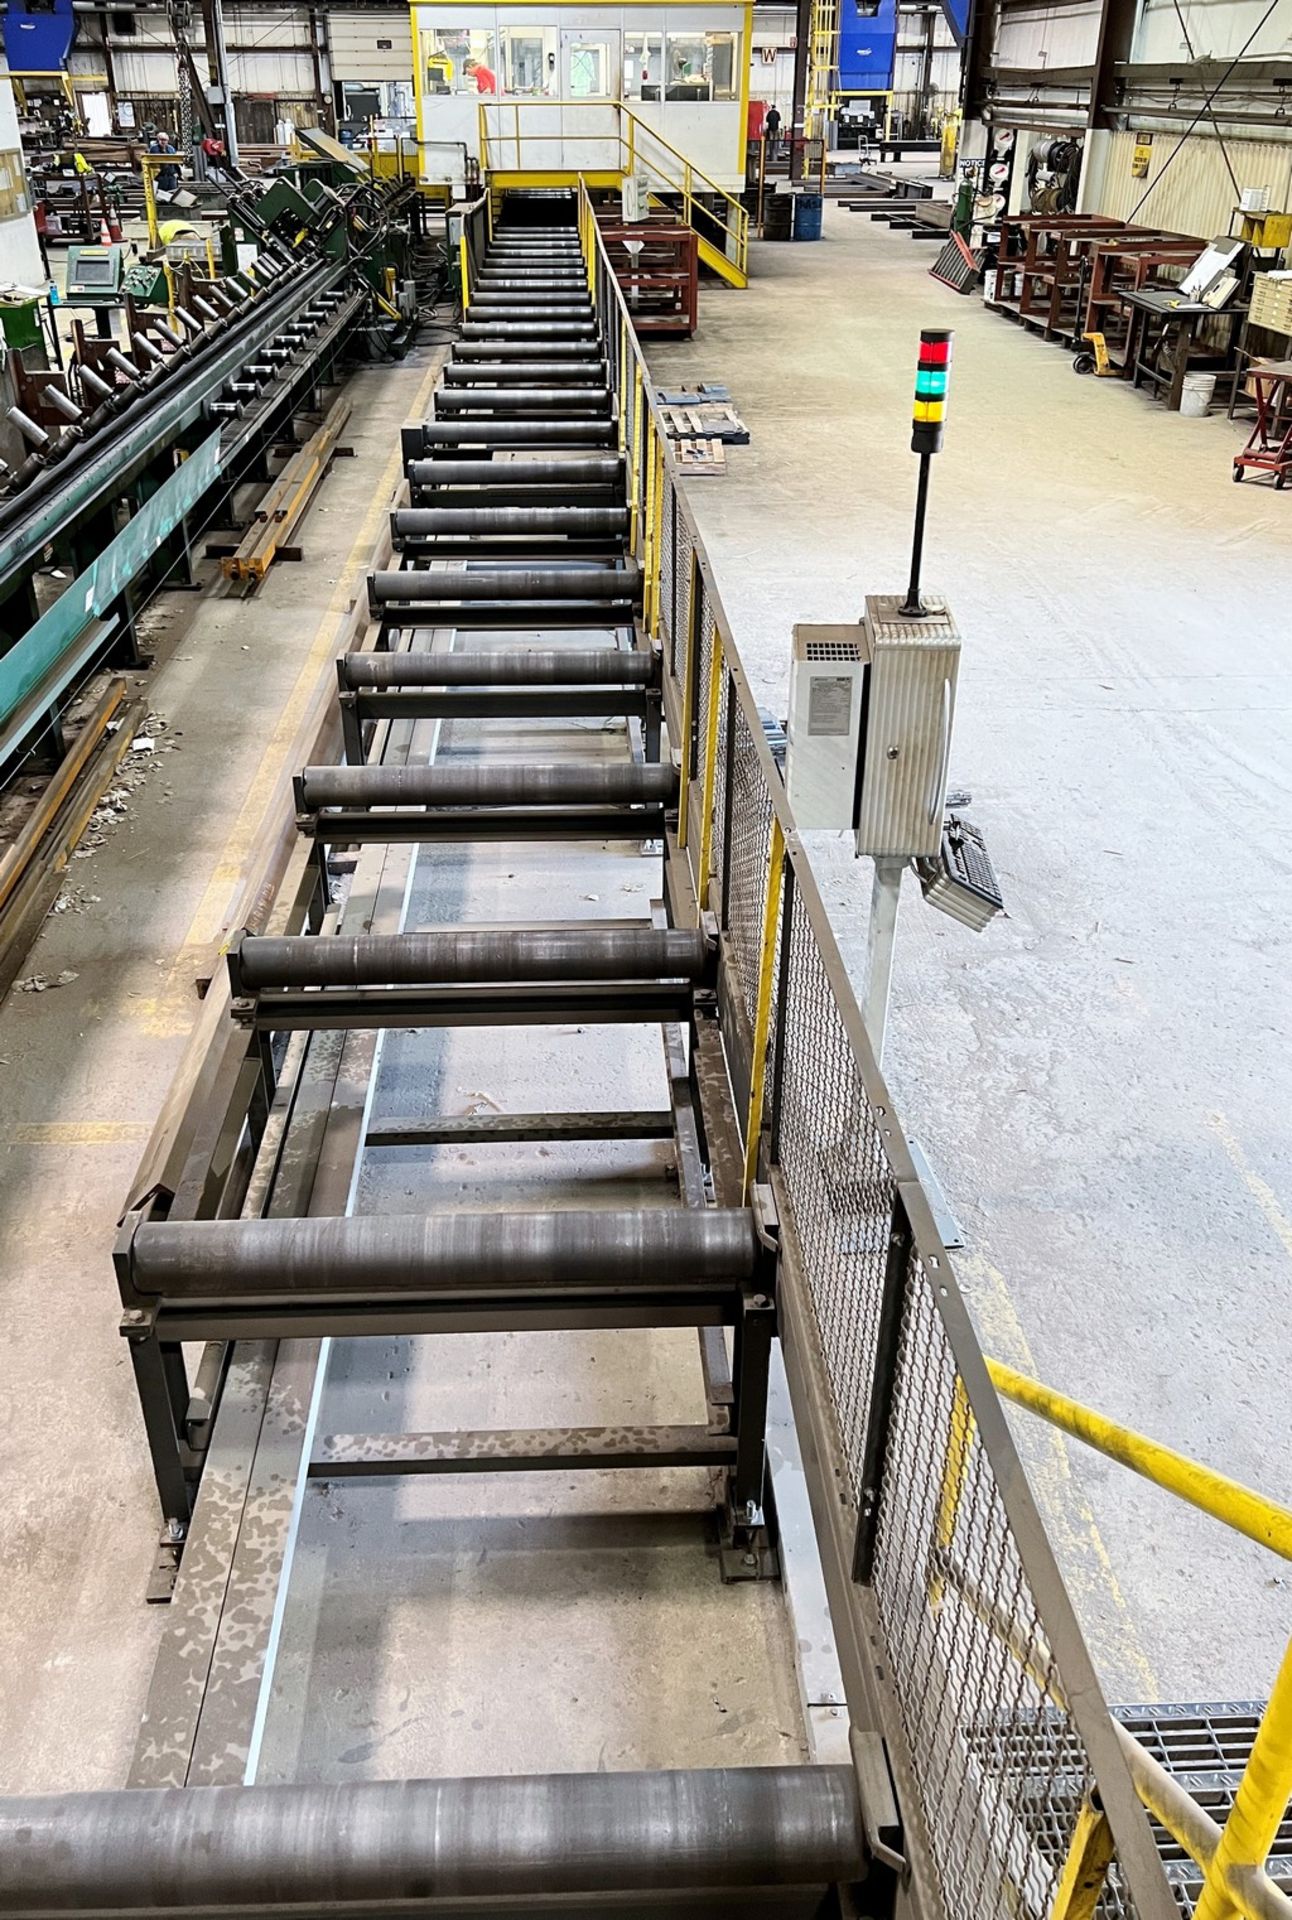 Heavy Duty Roller Conveyor with Material Transfers - Image 3 of 21